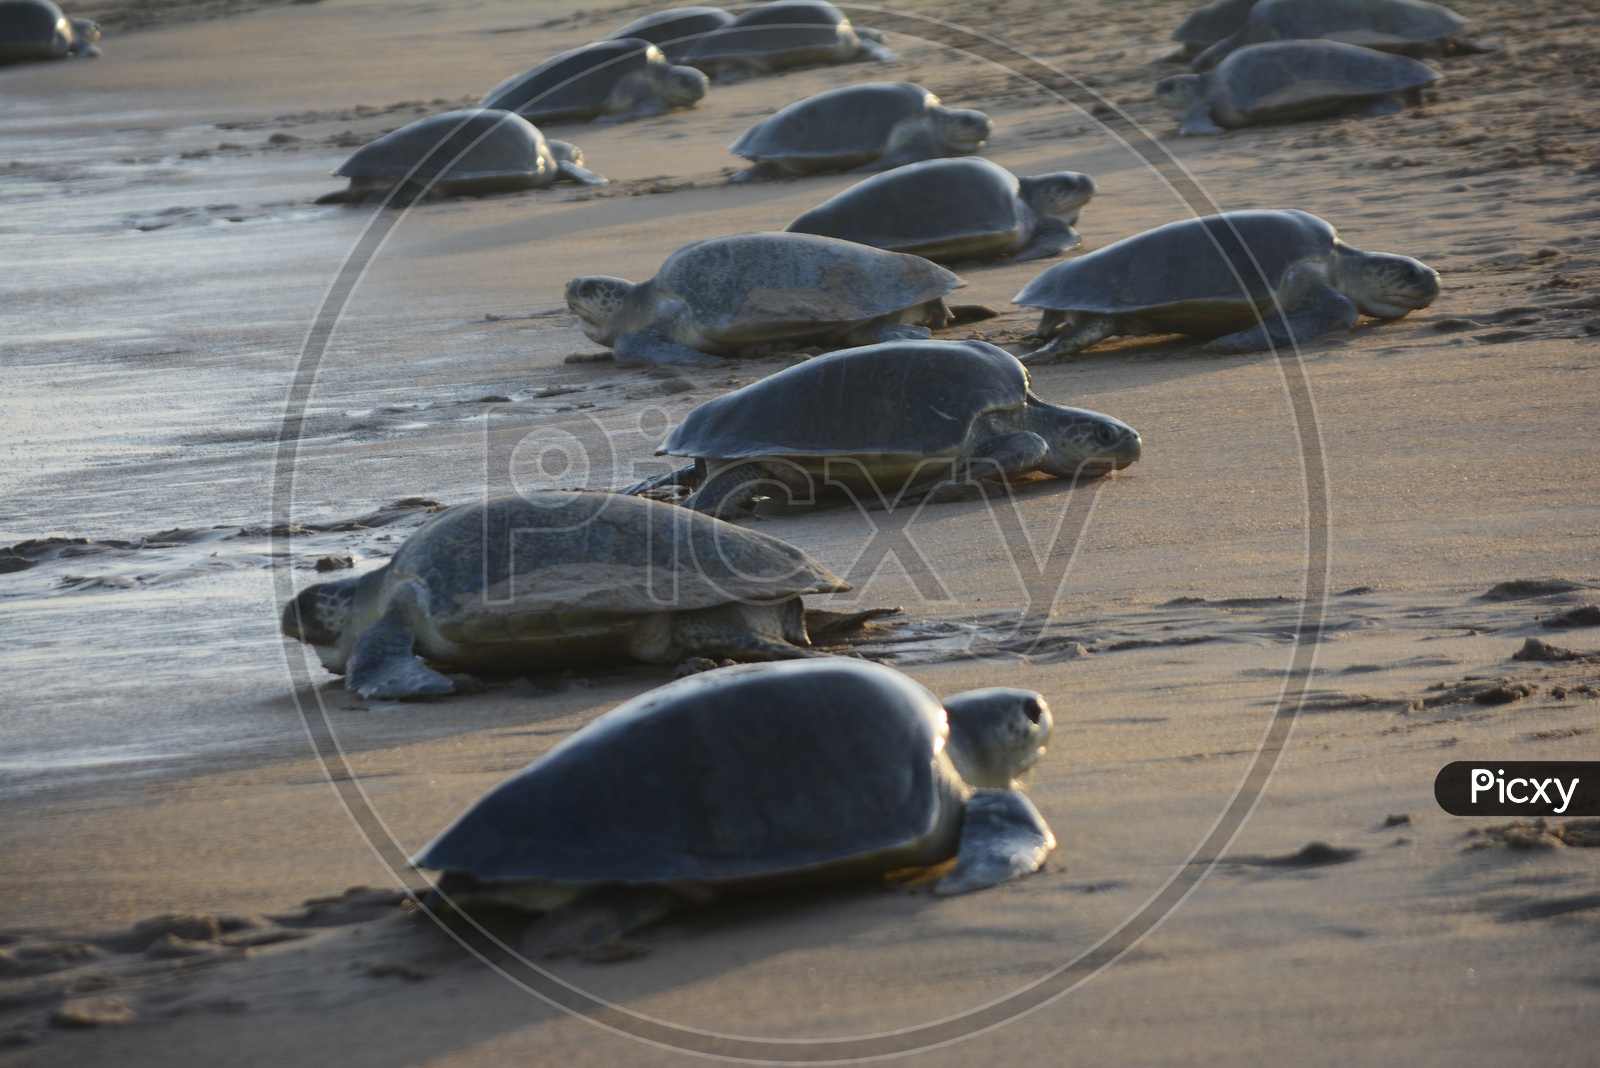 Olive Ridley Sea Turtles coming to laying/hatching their eggs and some leaving back to the sea